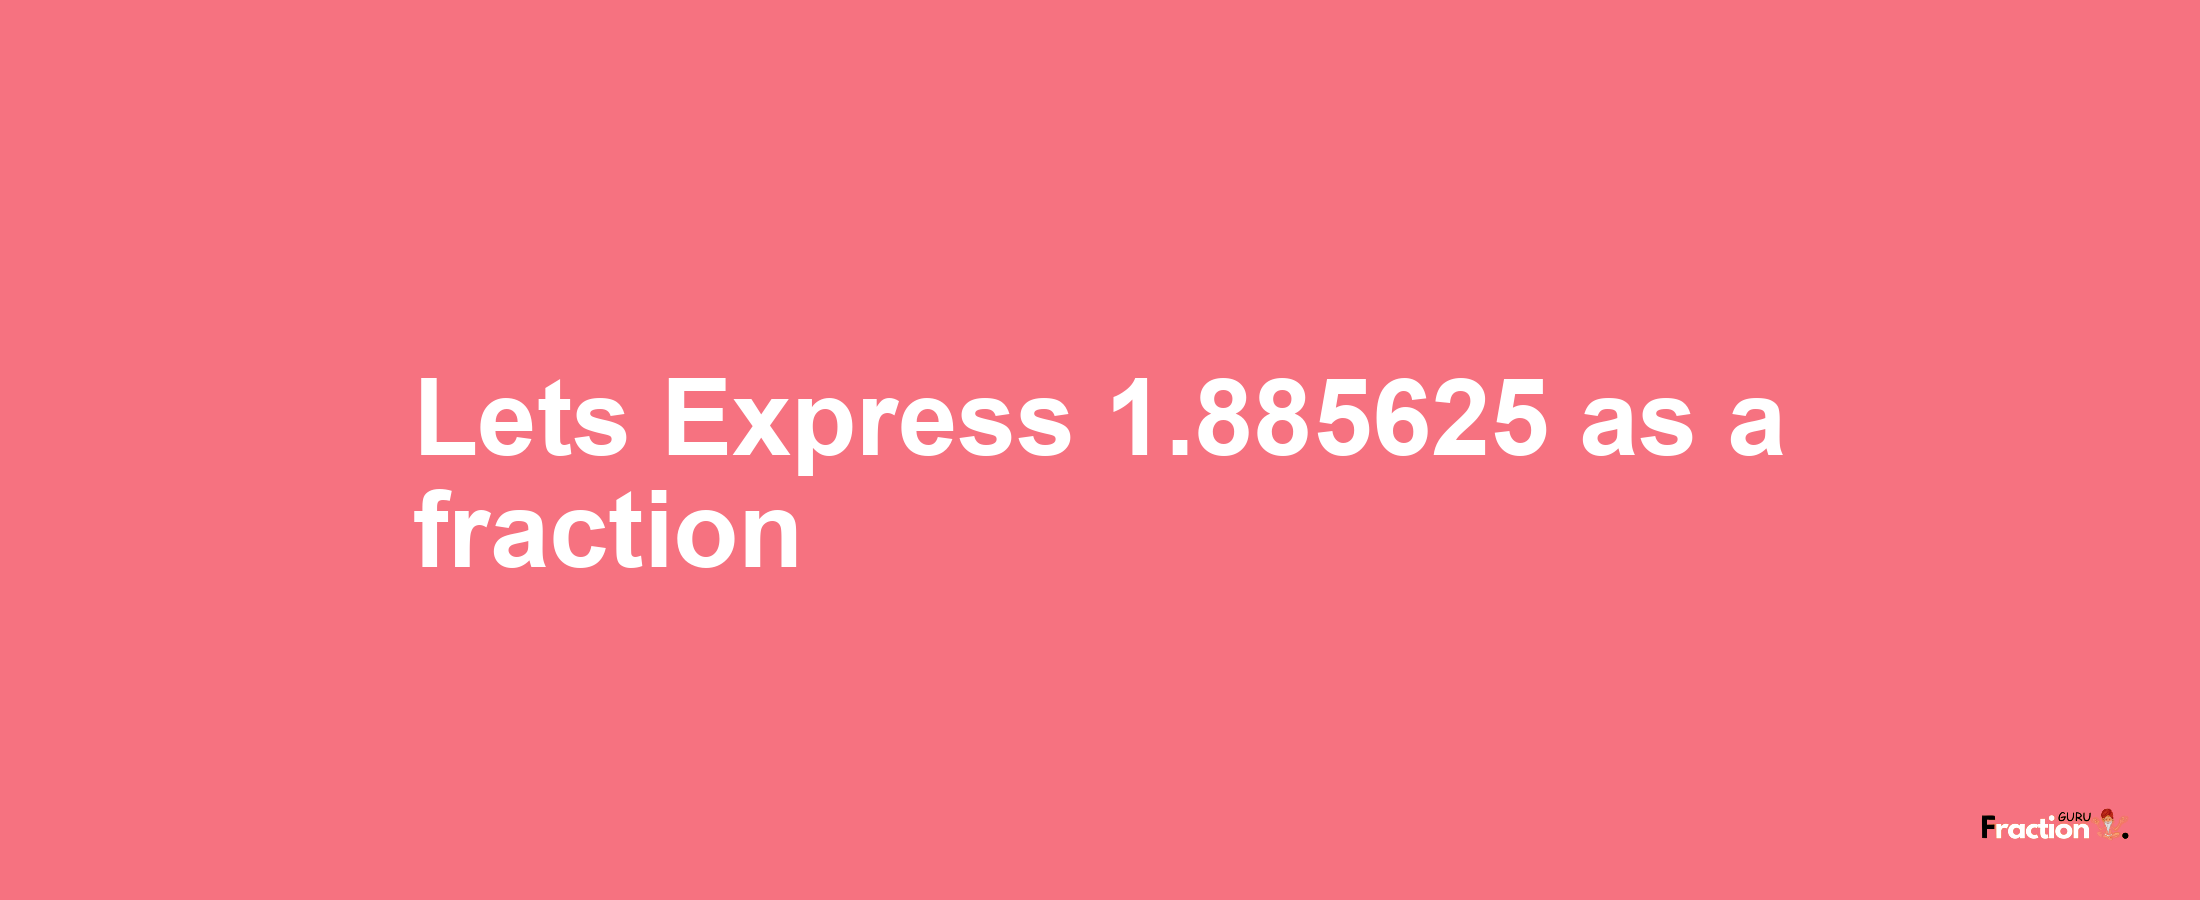 Lets Express 1.885625 as afraction